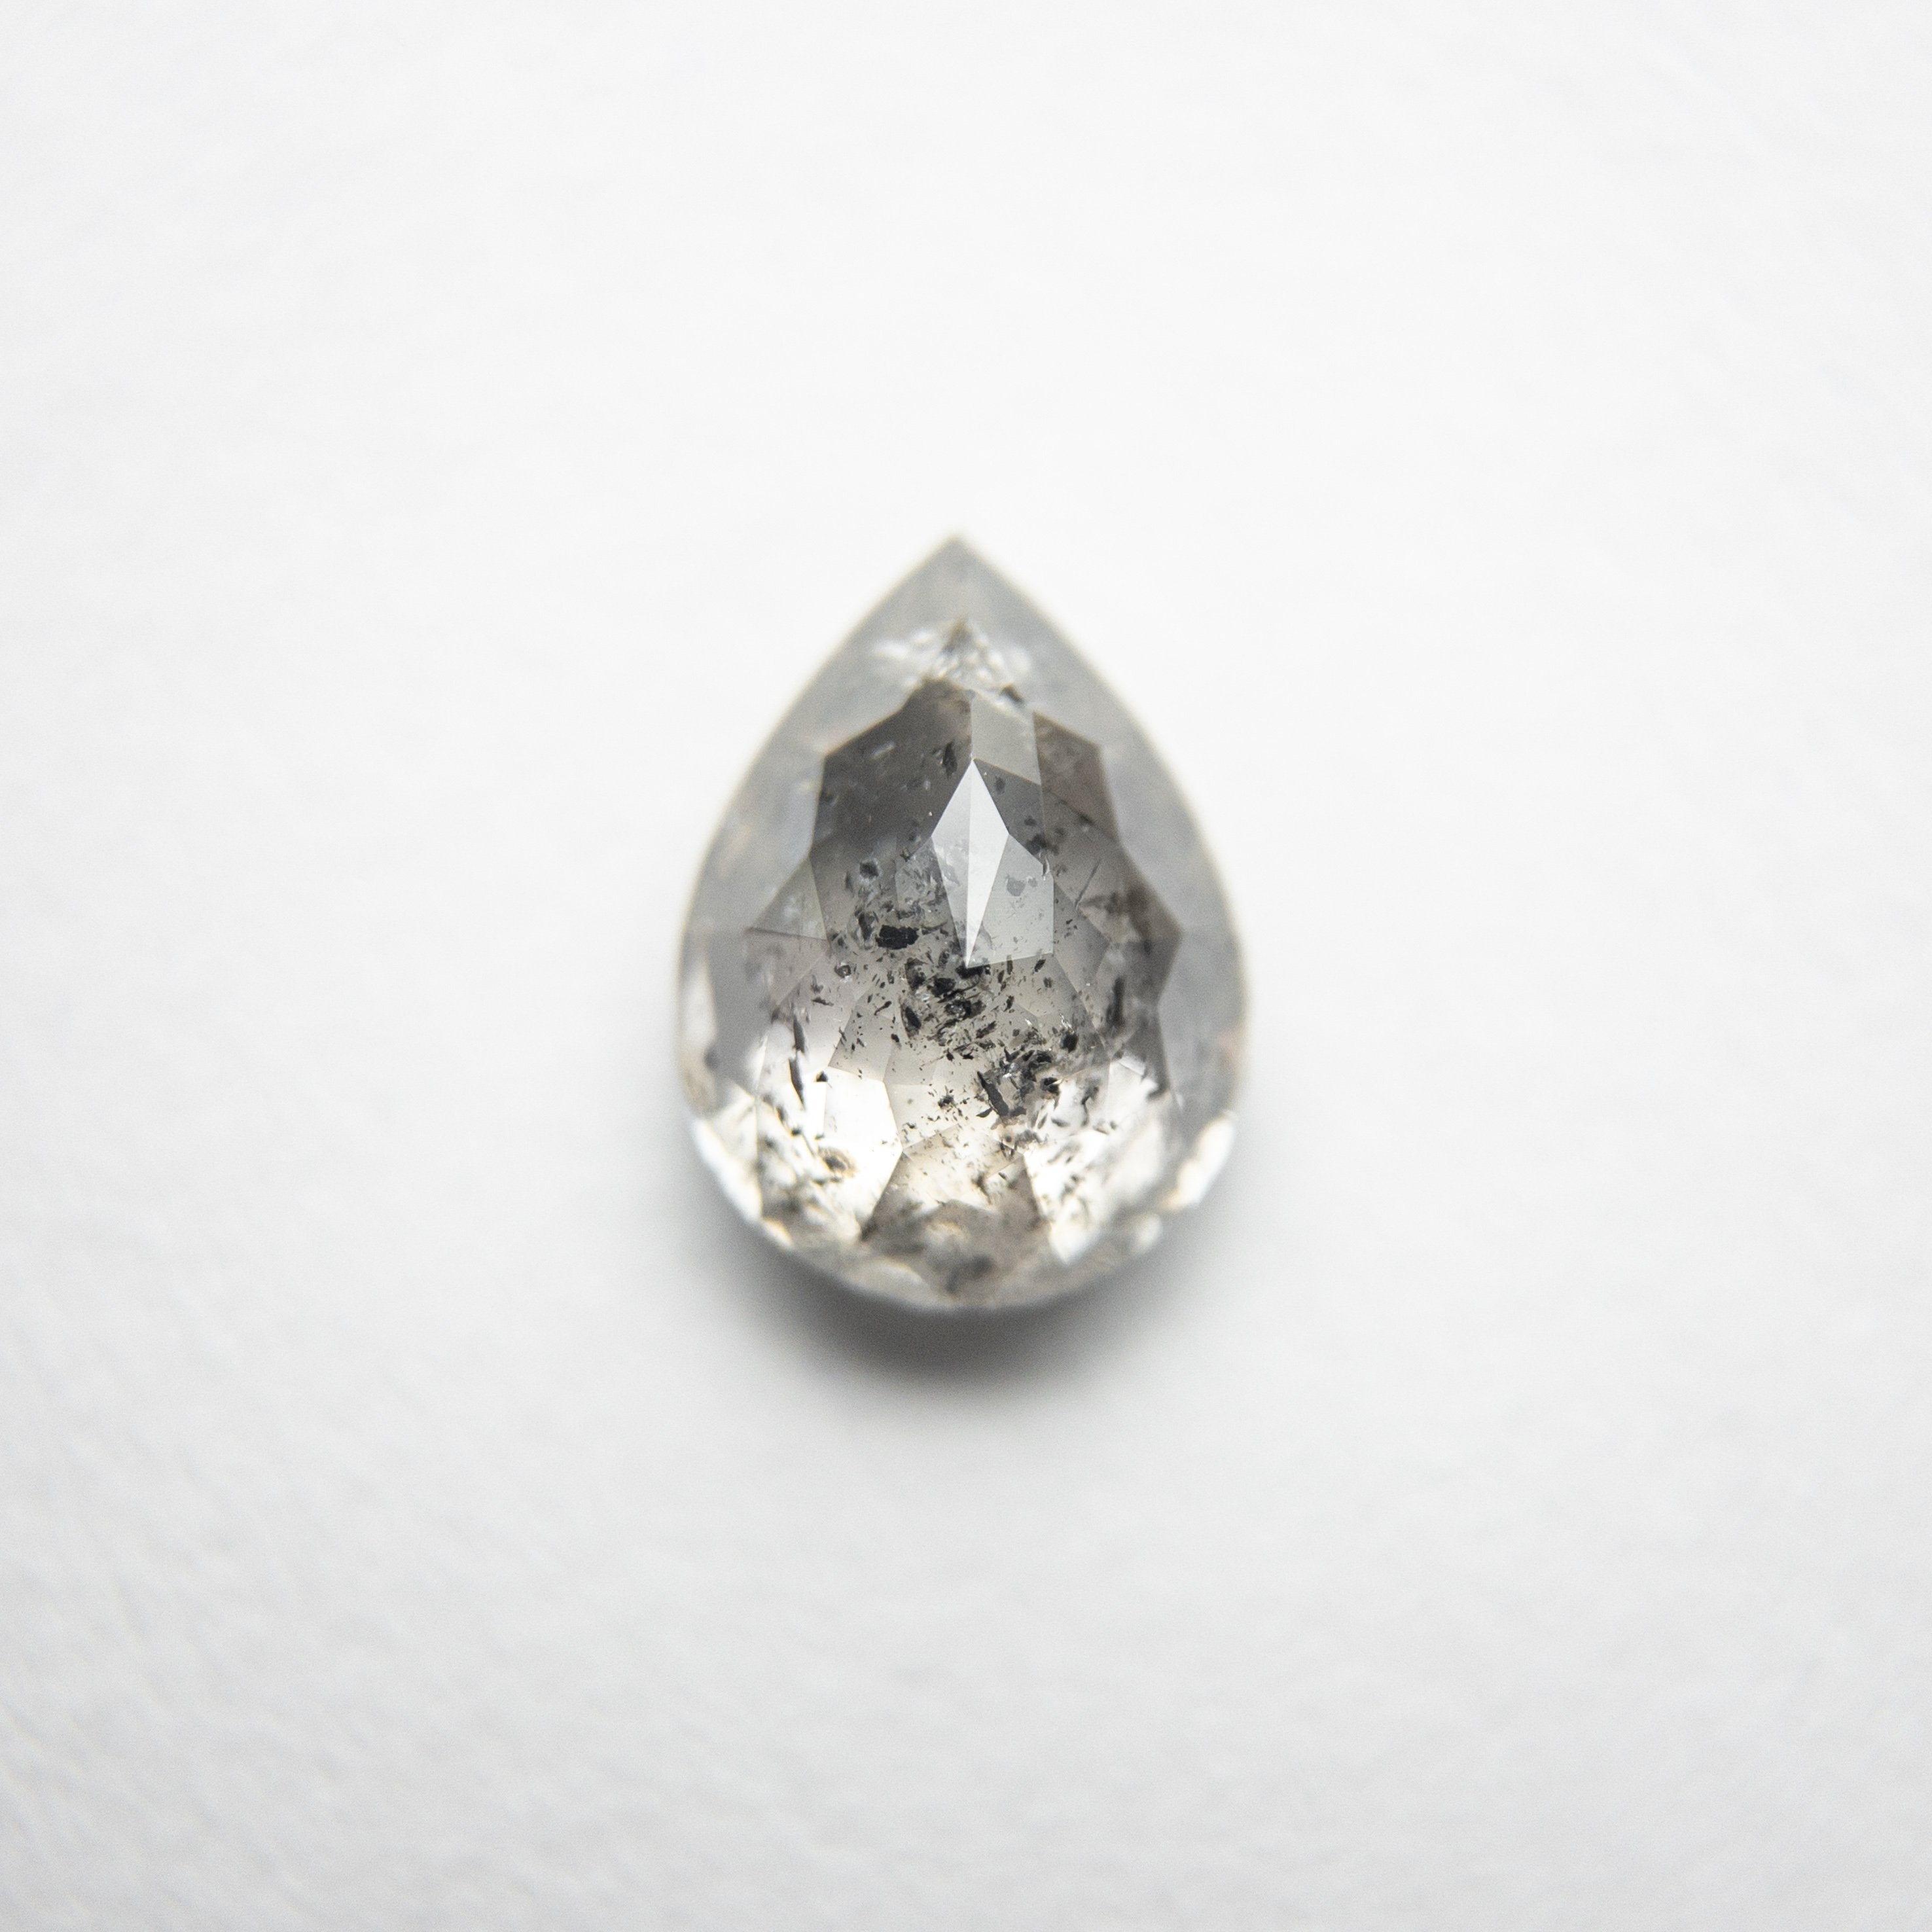 0.99ct 7.46x5.55x3.16mm Pear Double Cut 18110-11 hold D878 Aug 4 2020